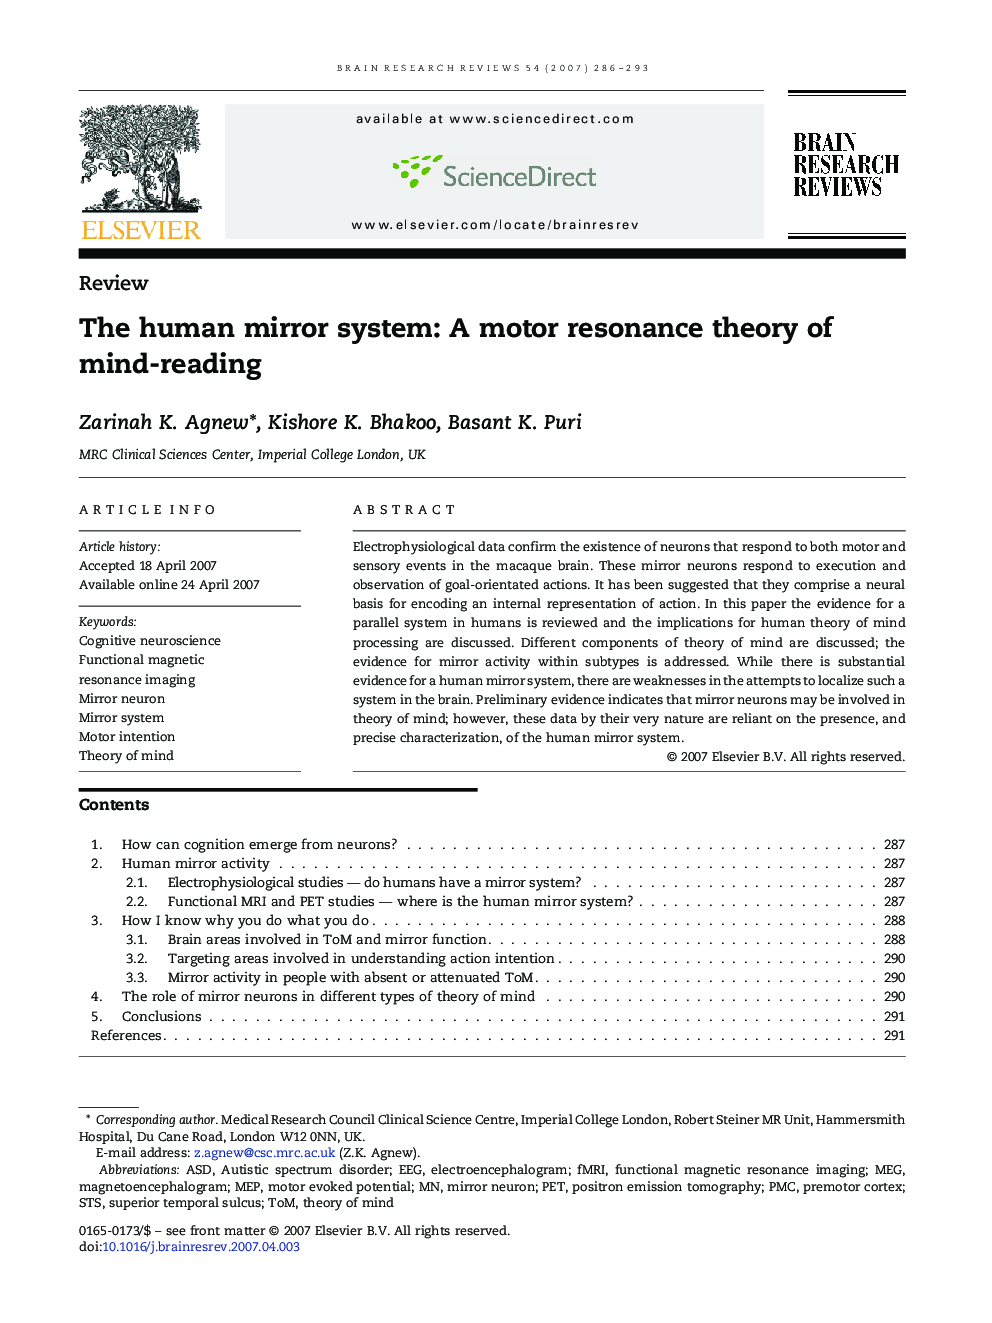 The human mirror system: A motor resonance theory of mind-reading